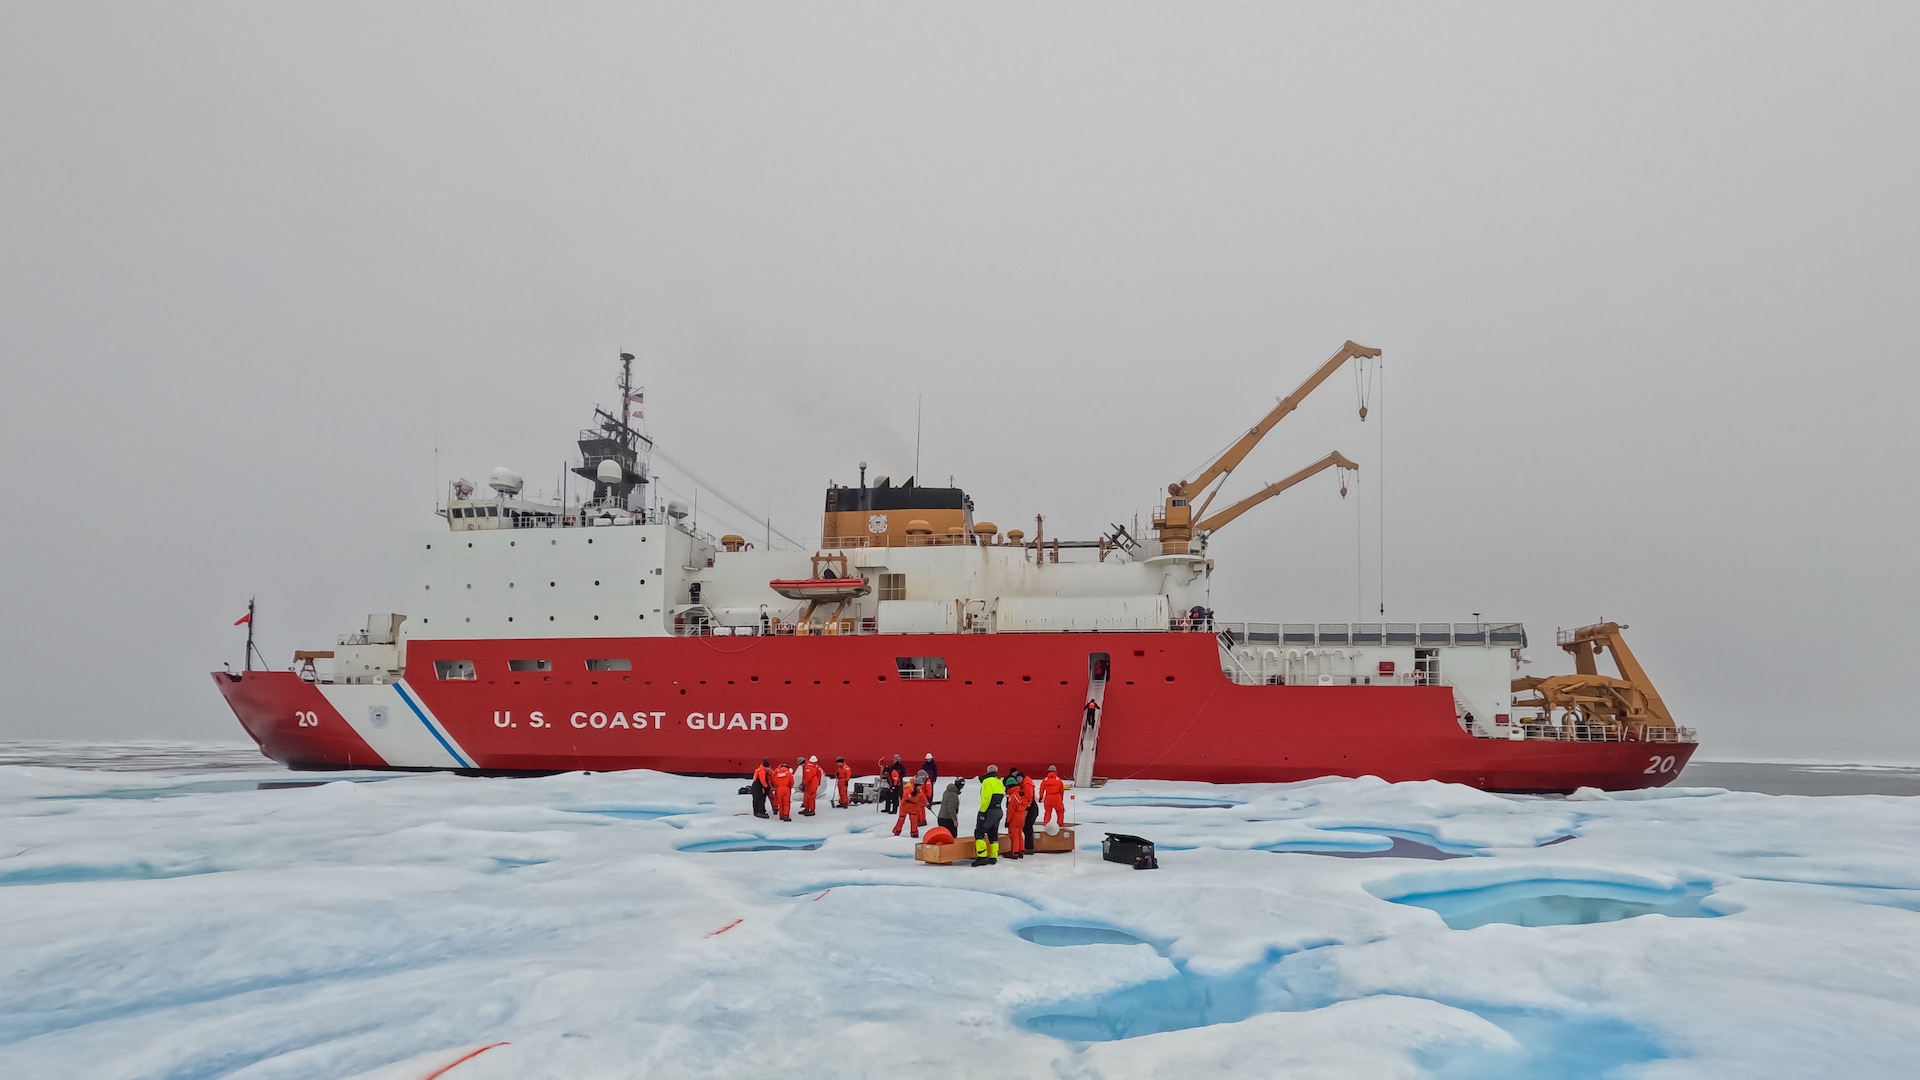 A U.S. Coast Guard Cutter Healy (WAGB 20) station keeps alongside a multi-year ice floe while a team of crew and researchers install equipment in the Beaufort Sea, Aug. 6, 2023. The Healy is ideal for science and research projects like the Arctic Mobile Observing System; providing access to the most remote reaches of the Arctic Ocean; areas barricaded by pack ice and insurmountable by most research vessels. (Coast Guard photo by Petty Officer 3rd Class Briana Carter)